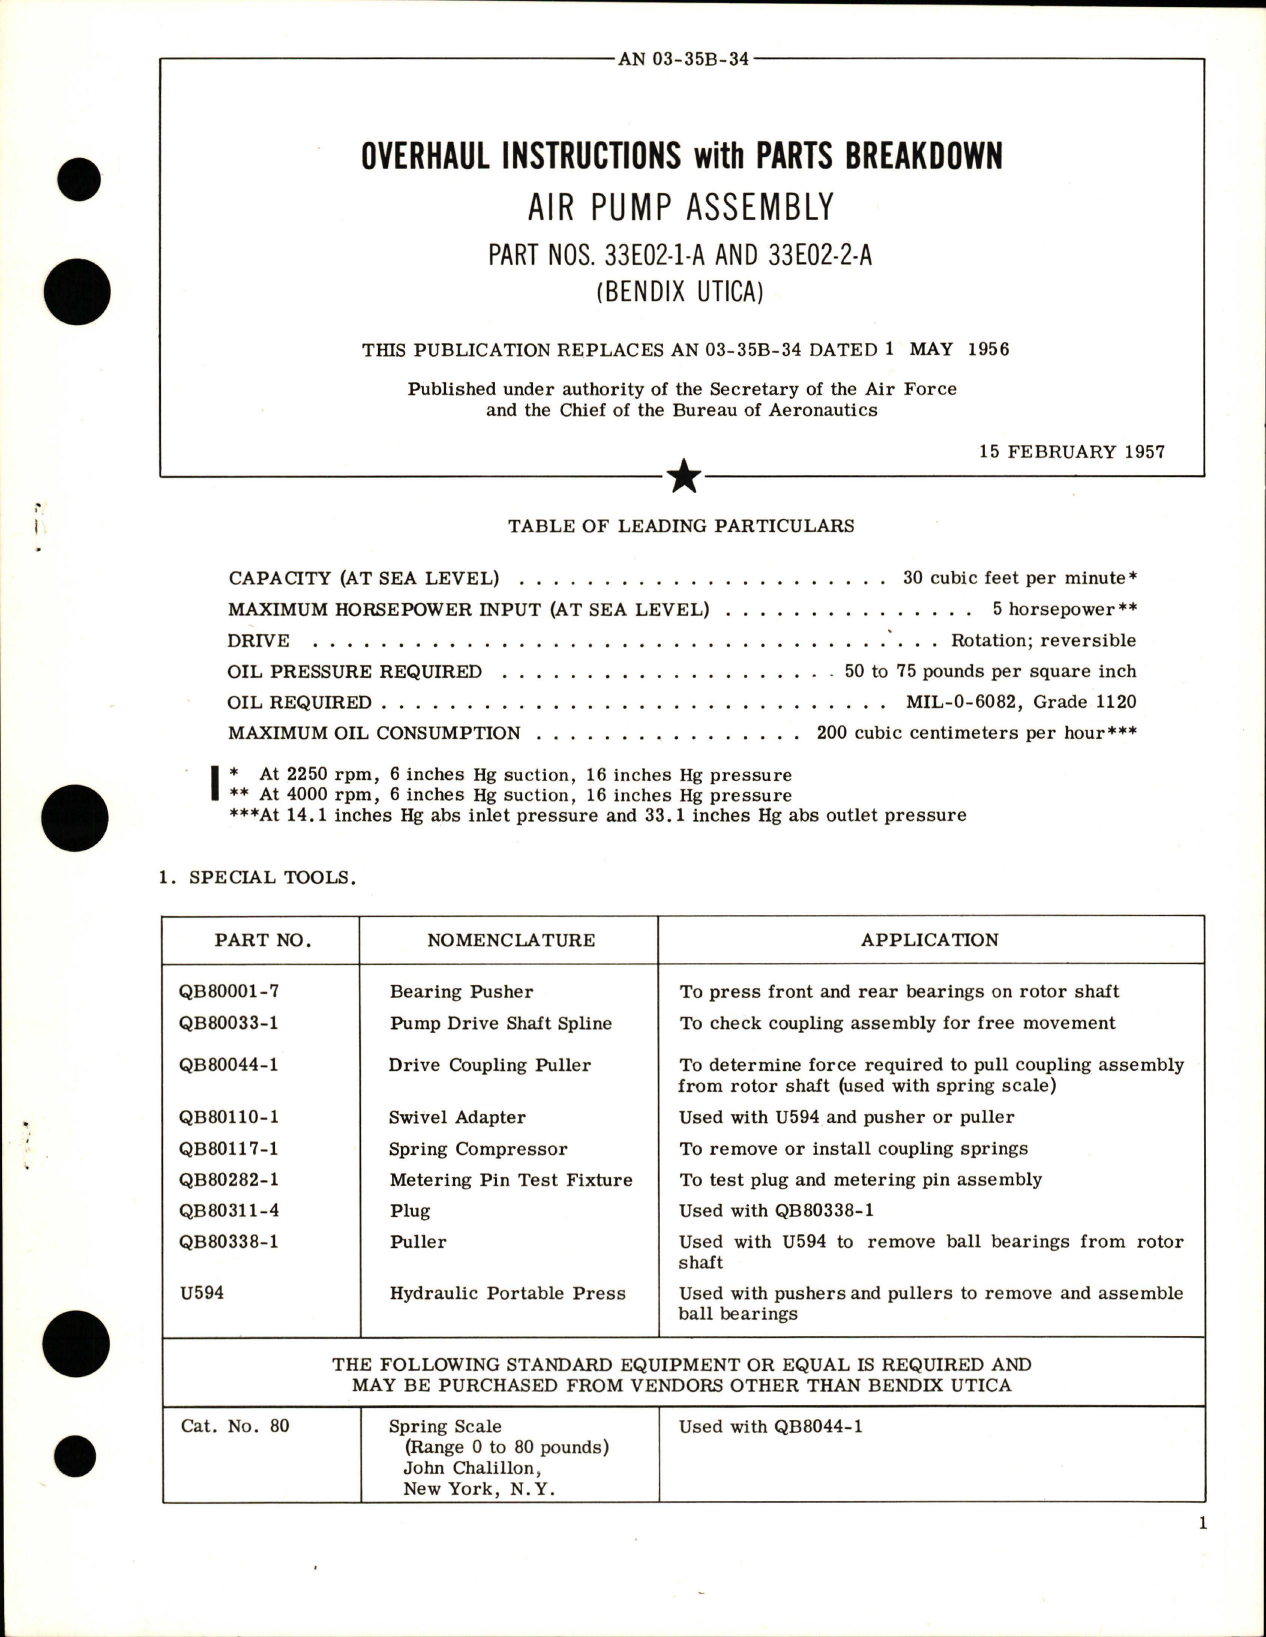 Sample page 1 from AirCorps Library document: Overhaul Instructions with Parts Breakdown for Air Pump Assembly - Parts 33E02-1-A and 33E02-2-A 